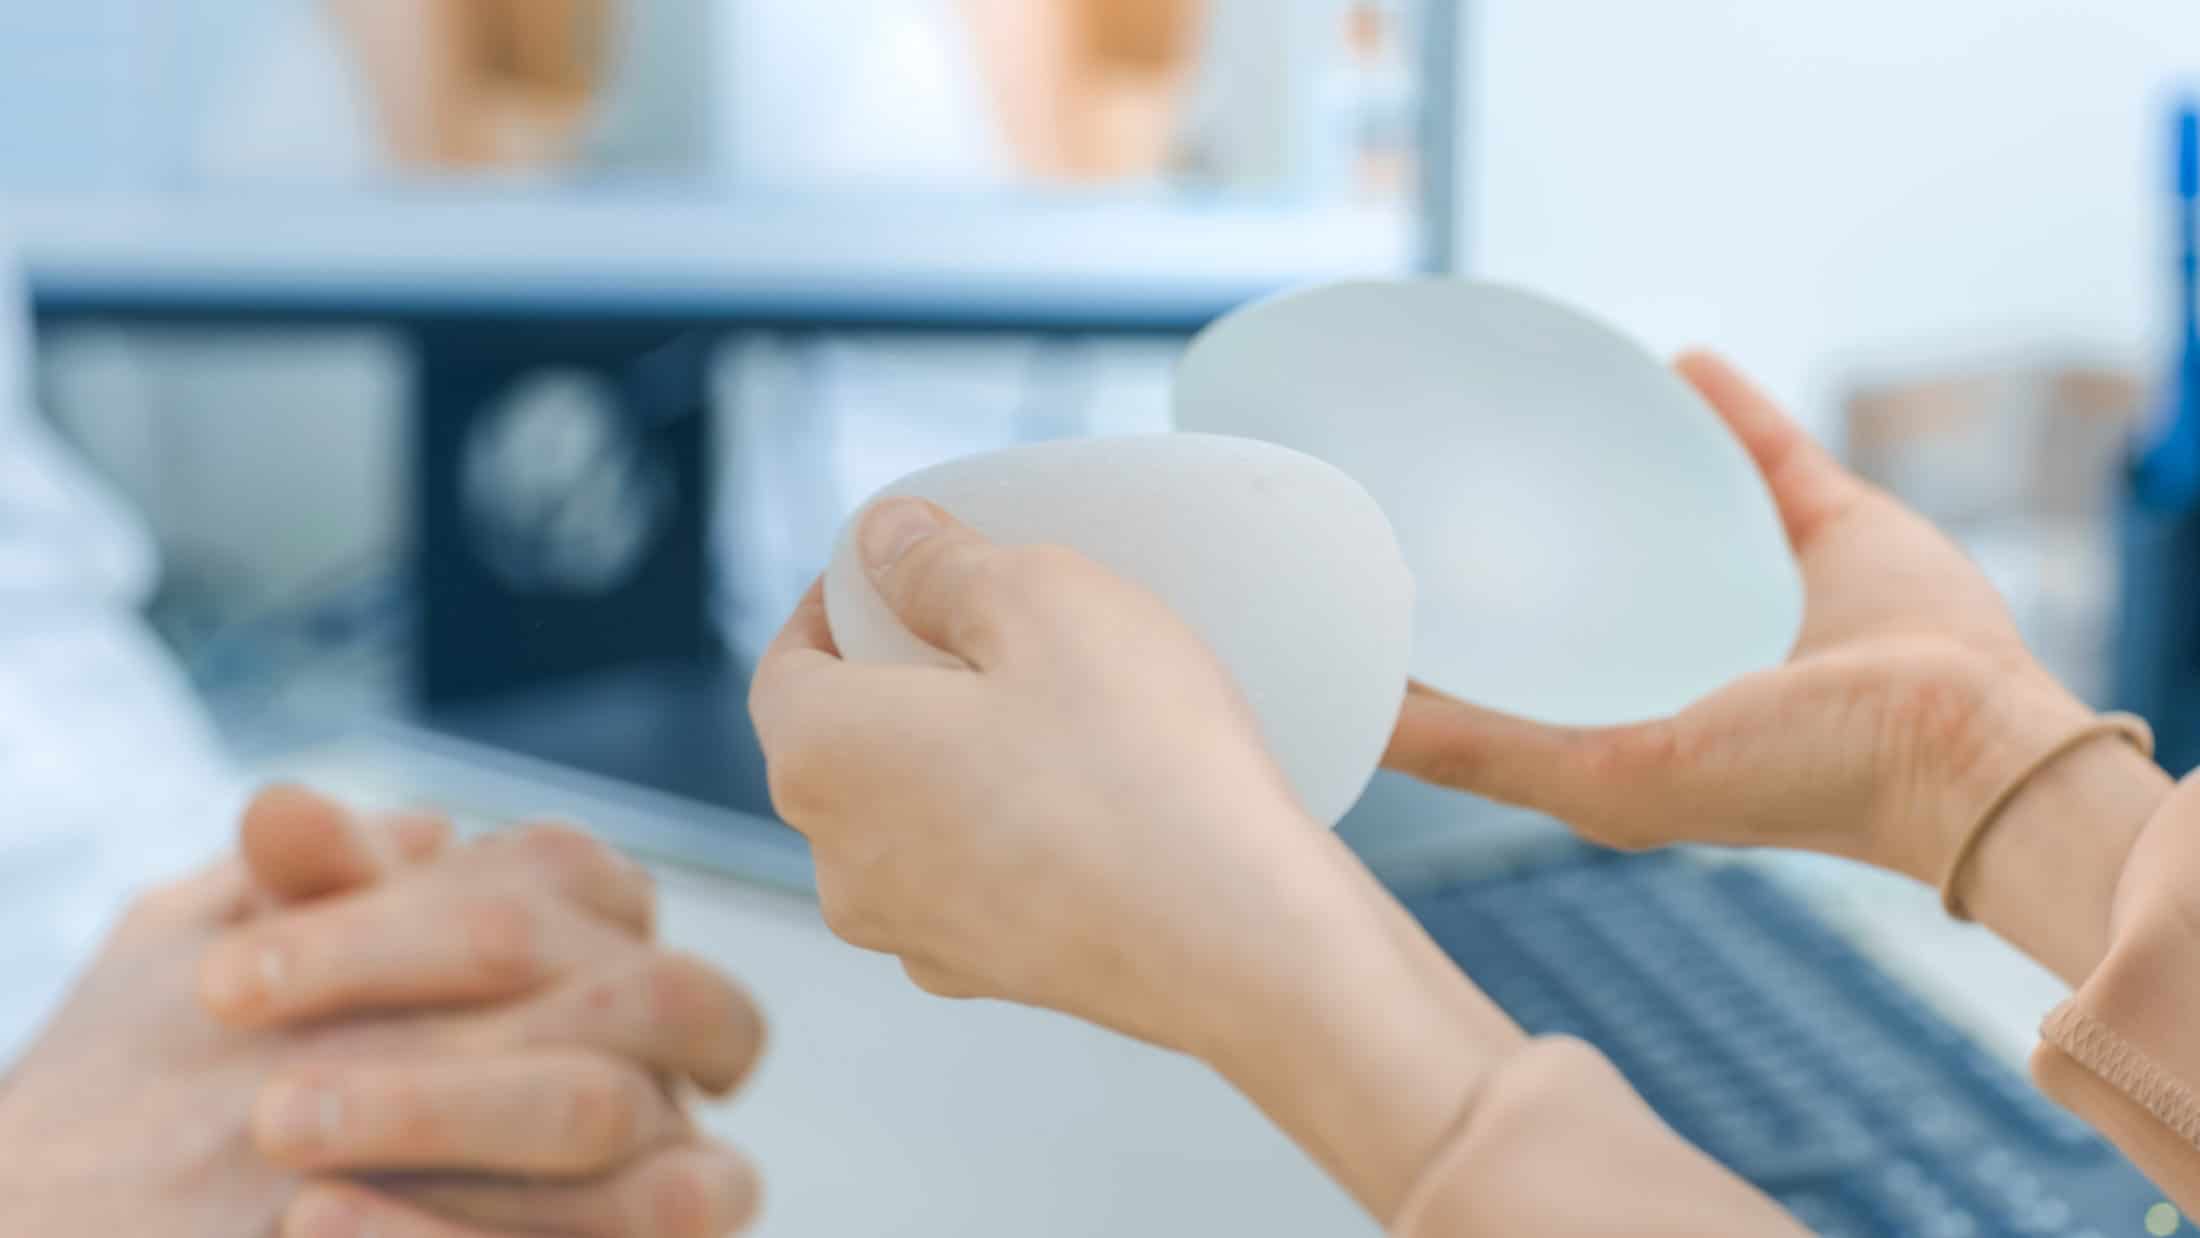 Plastic / Cosmetic Surgeon Shows Female Patient Breast Implant Samples for Her Future Surgery. Professional and Famous Surgeon Working in Respectable Clinic.